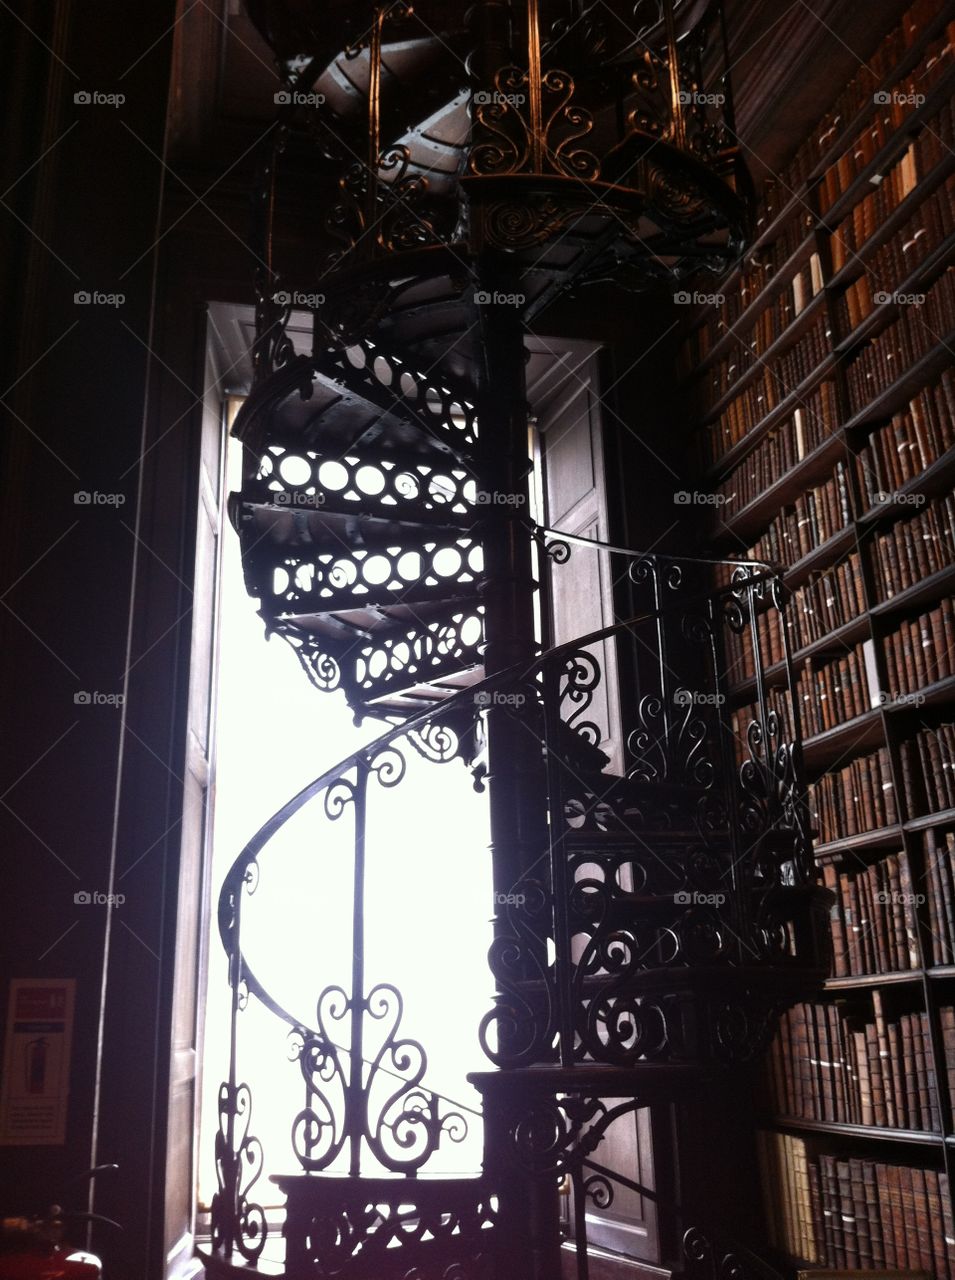 Spiral staircase in university library 